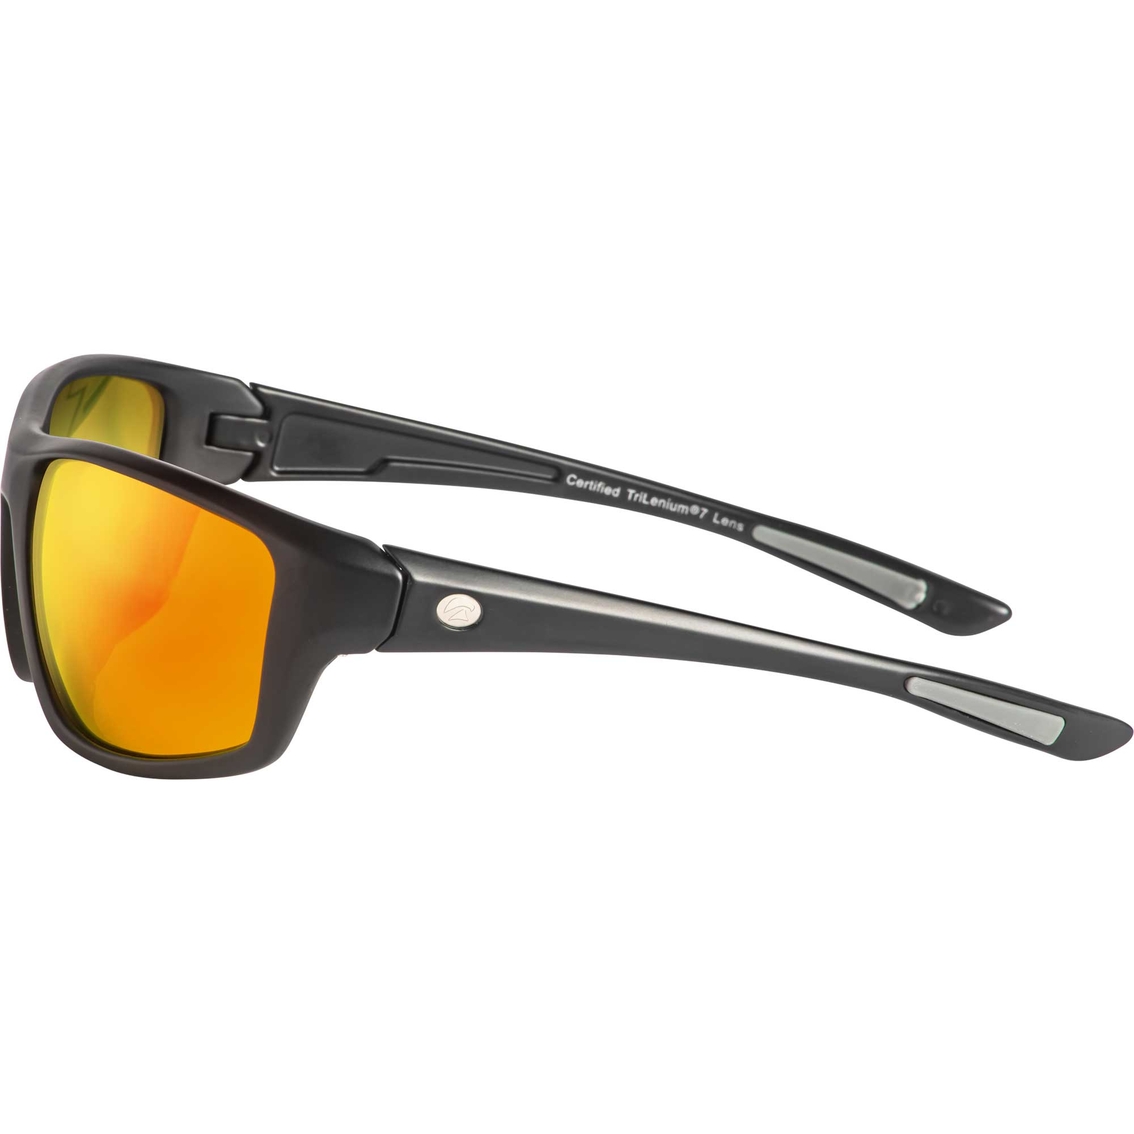 Eagle Eyes Hydro Sunglasses 81020 | Sunglasses | Clothing & Accessories ...